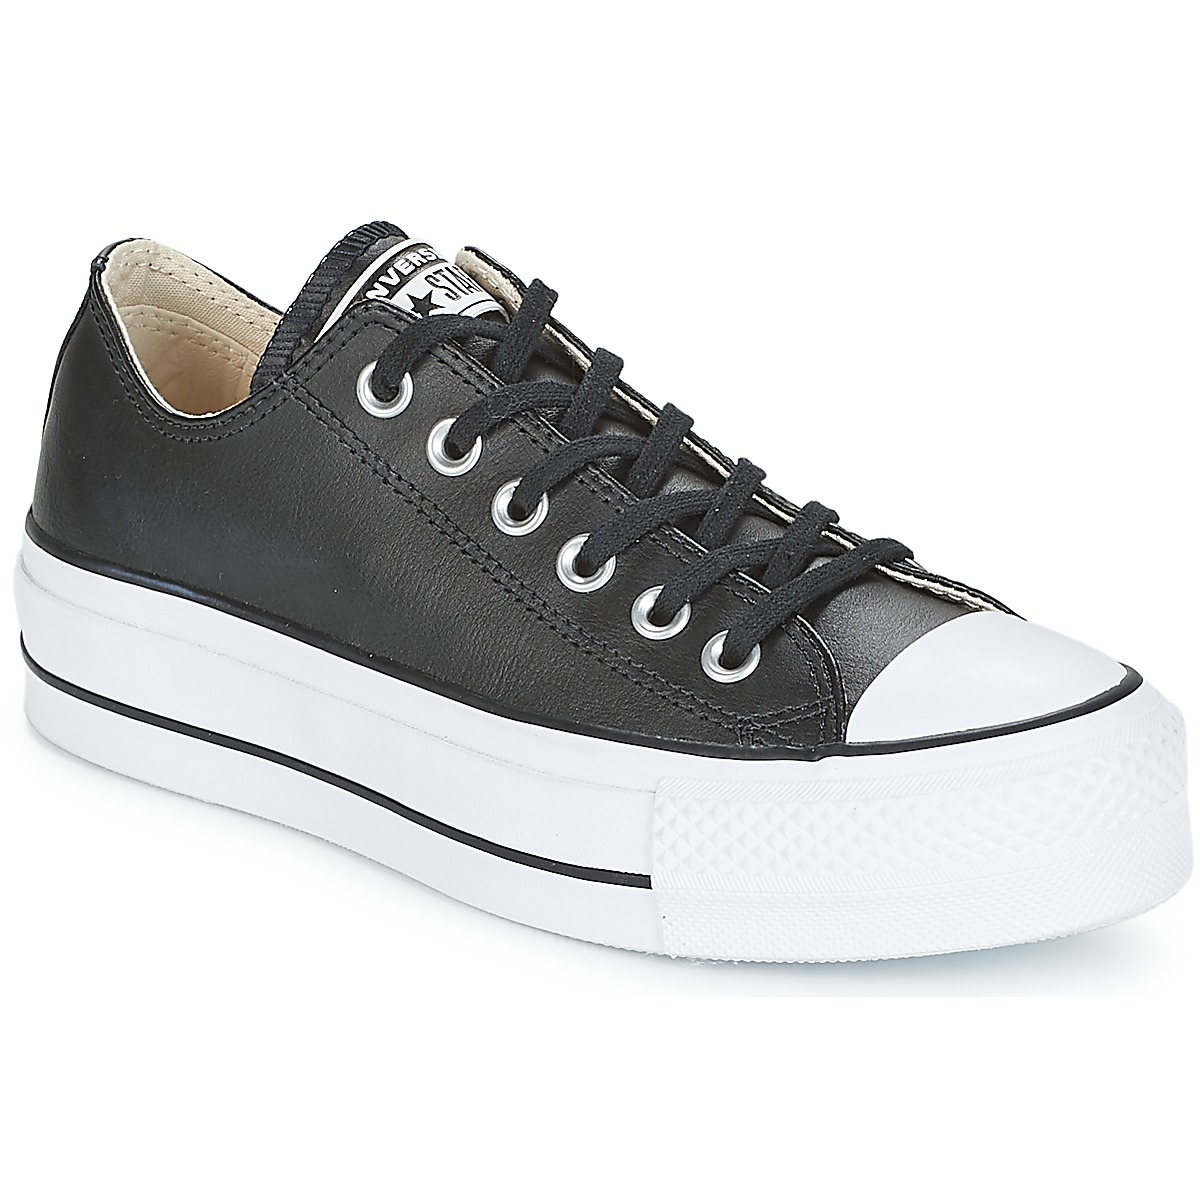 Kengät Converse CHUCK TAYLOR ALL STAR LIFT CLEAN OX LEATHER 37